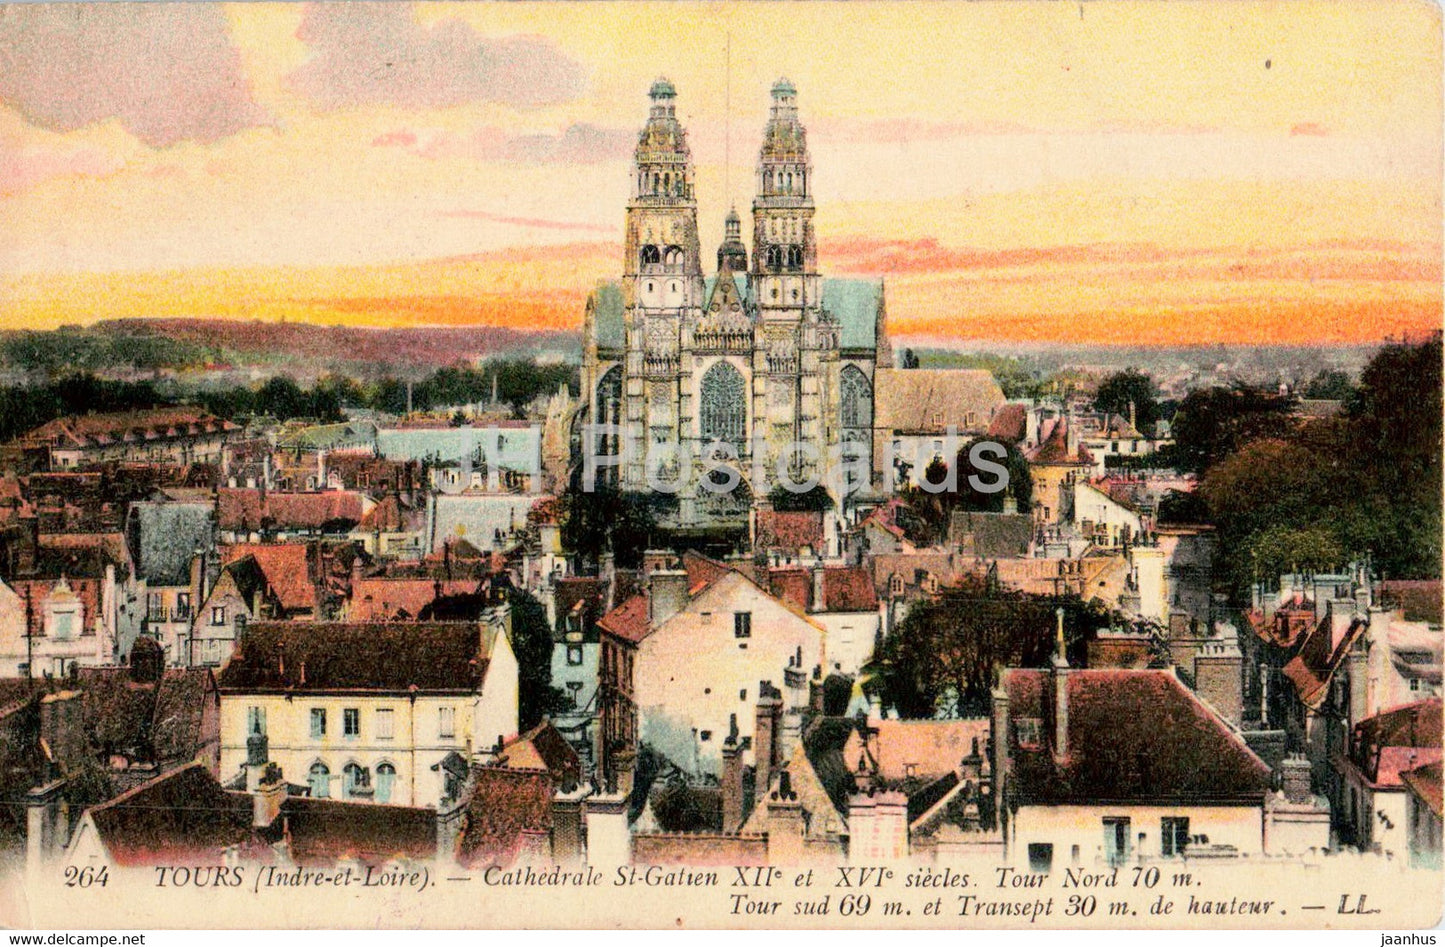 Tours - Cathedrale St Gatien - Tour Nord - Tour Sud - Transept - cathedral - 264 - old postcard - France - unused - JH Postcards